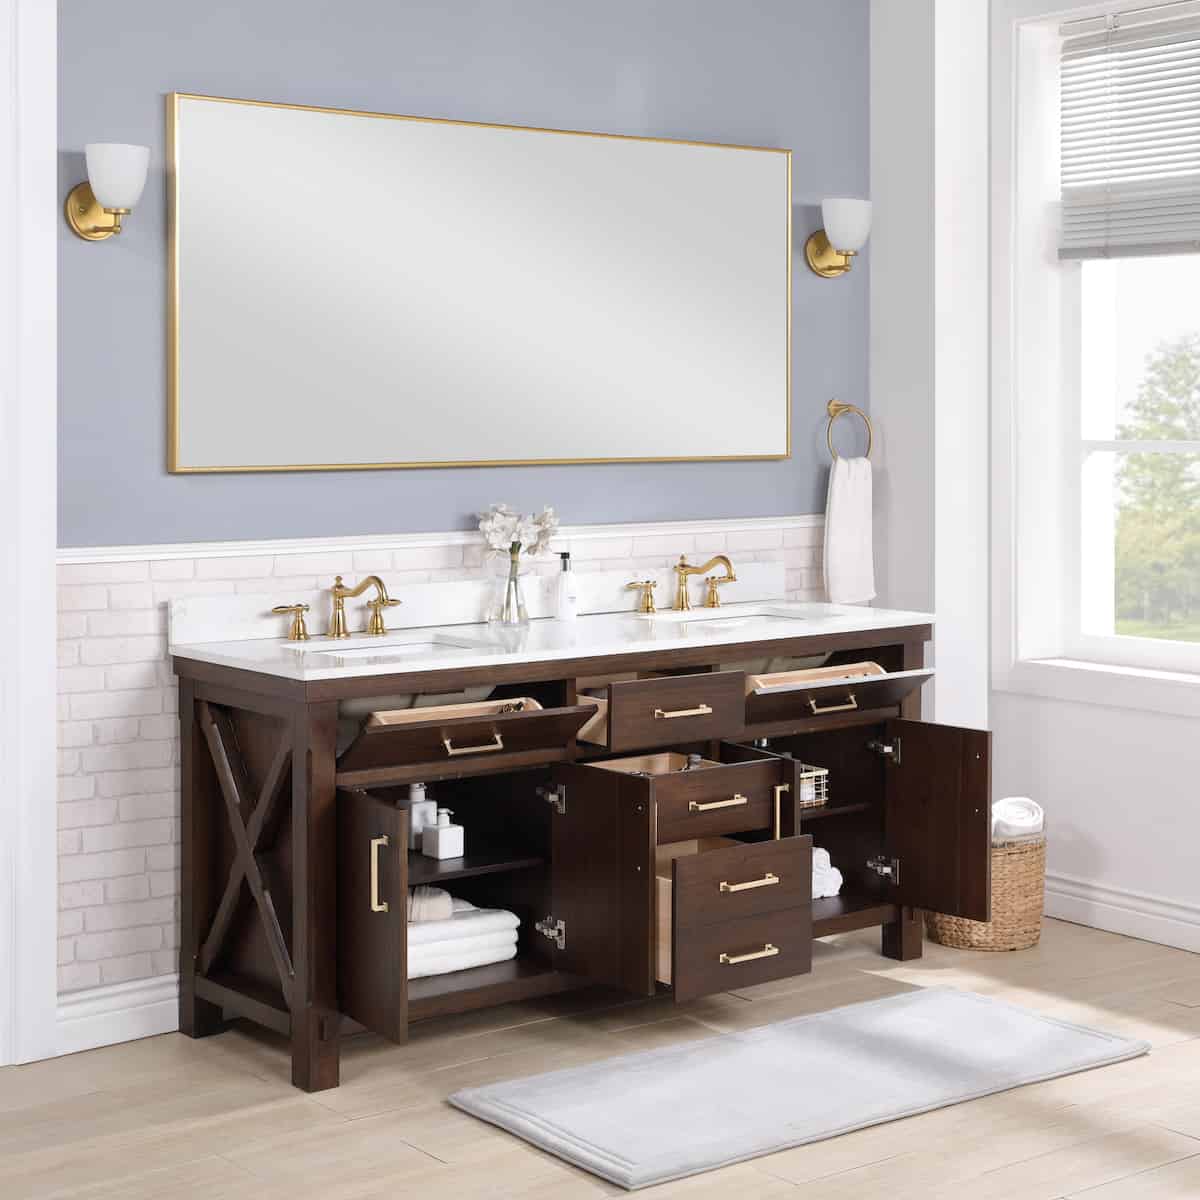 Vinnova Viella 72 Inch Freestanding Double Sink Bath Vanity in Deep Walnut Finish with White Composite Countertop With Mirror Inside 701872-DW-WS